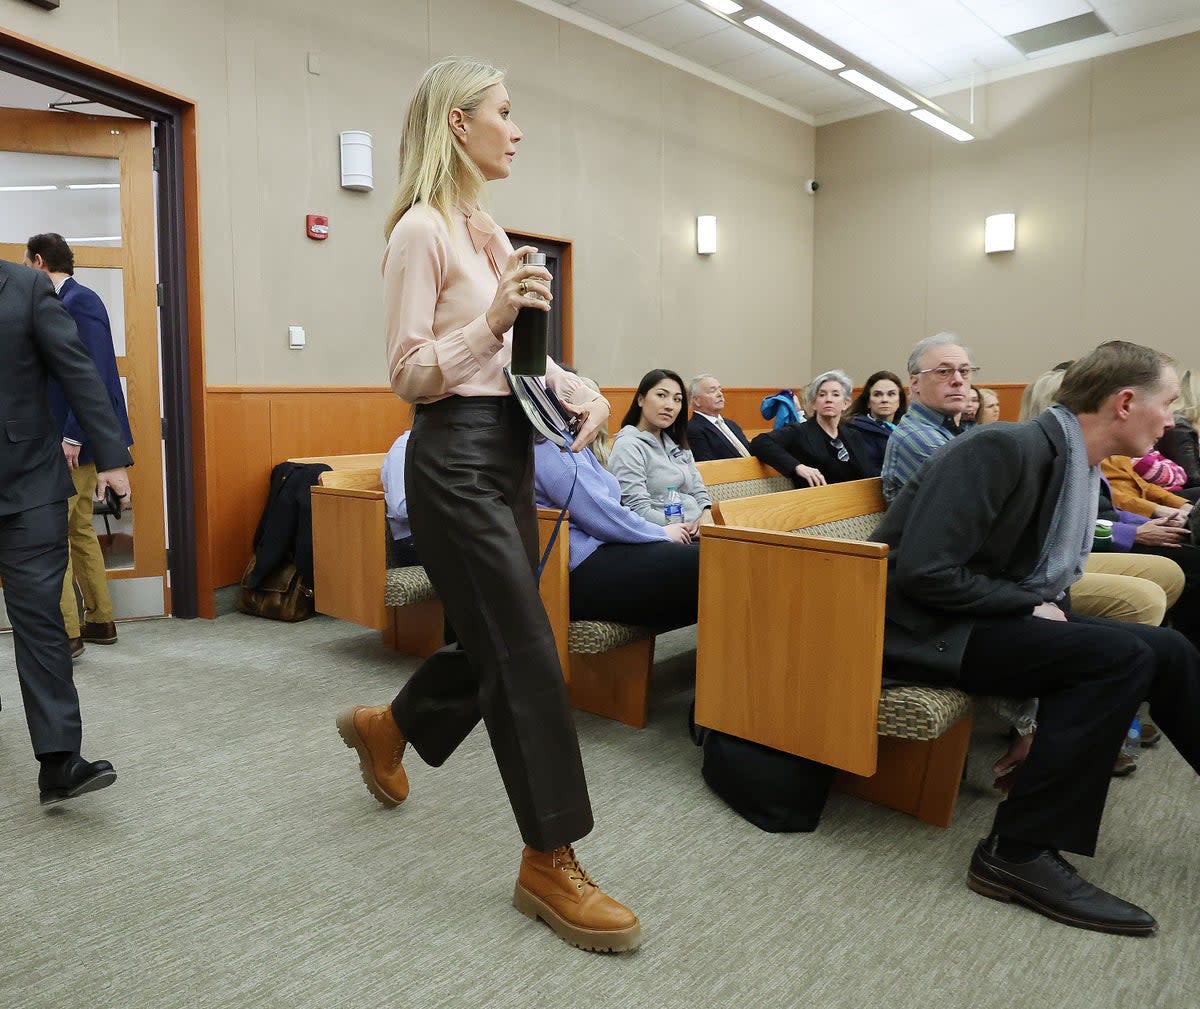 Gwyneth Paltrow enters the court during her civil trial over a collision with another skier (Getty Images)